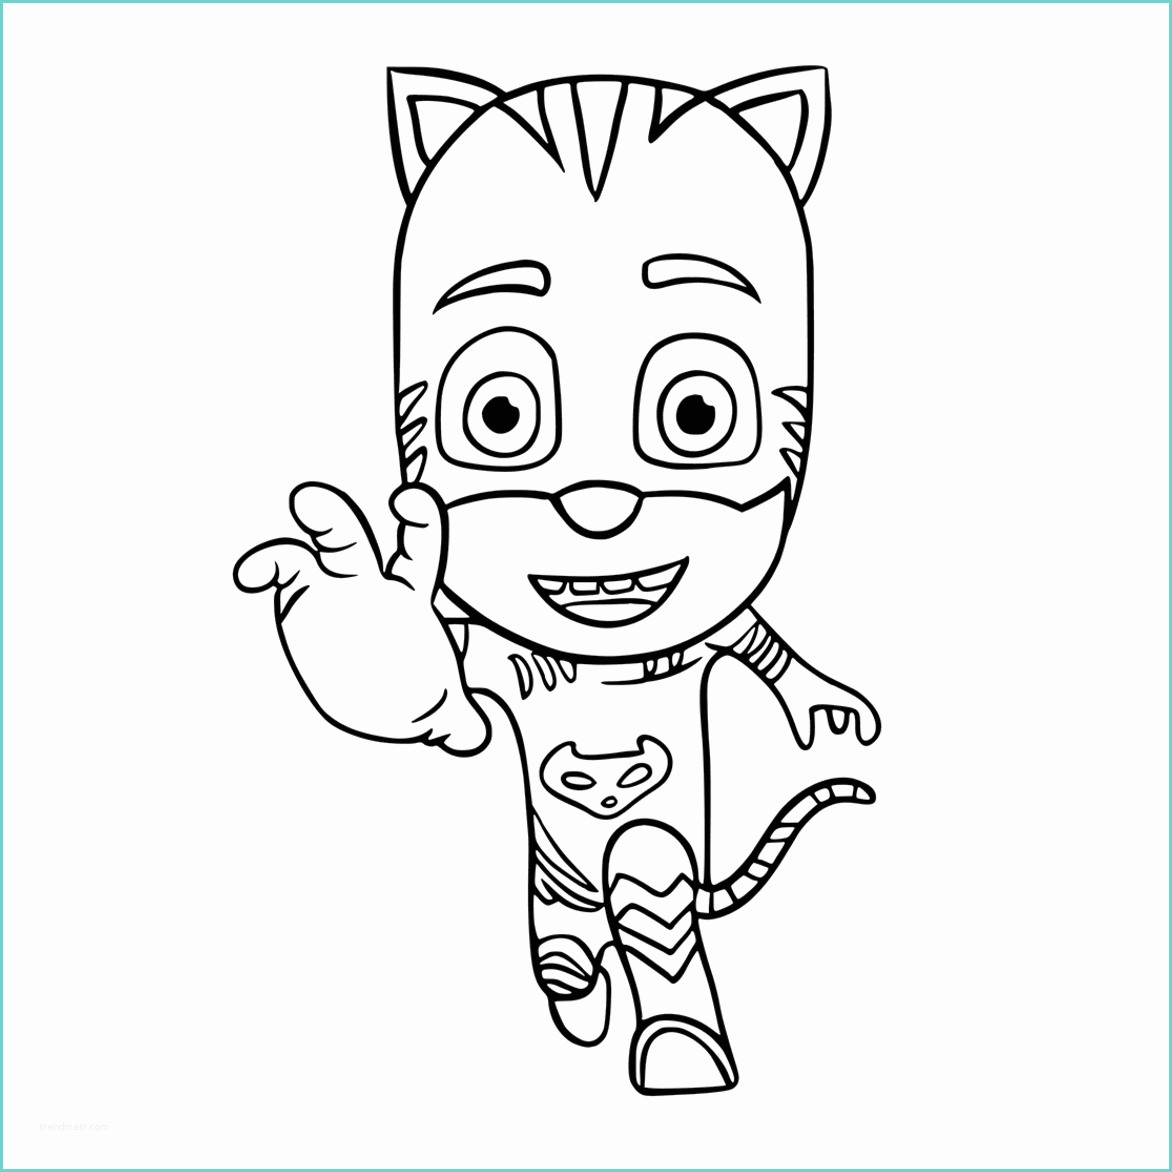 Mask Color De V33 Pj Masks Coloring Pages to and Print for Free